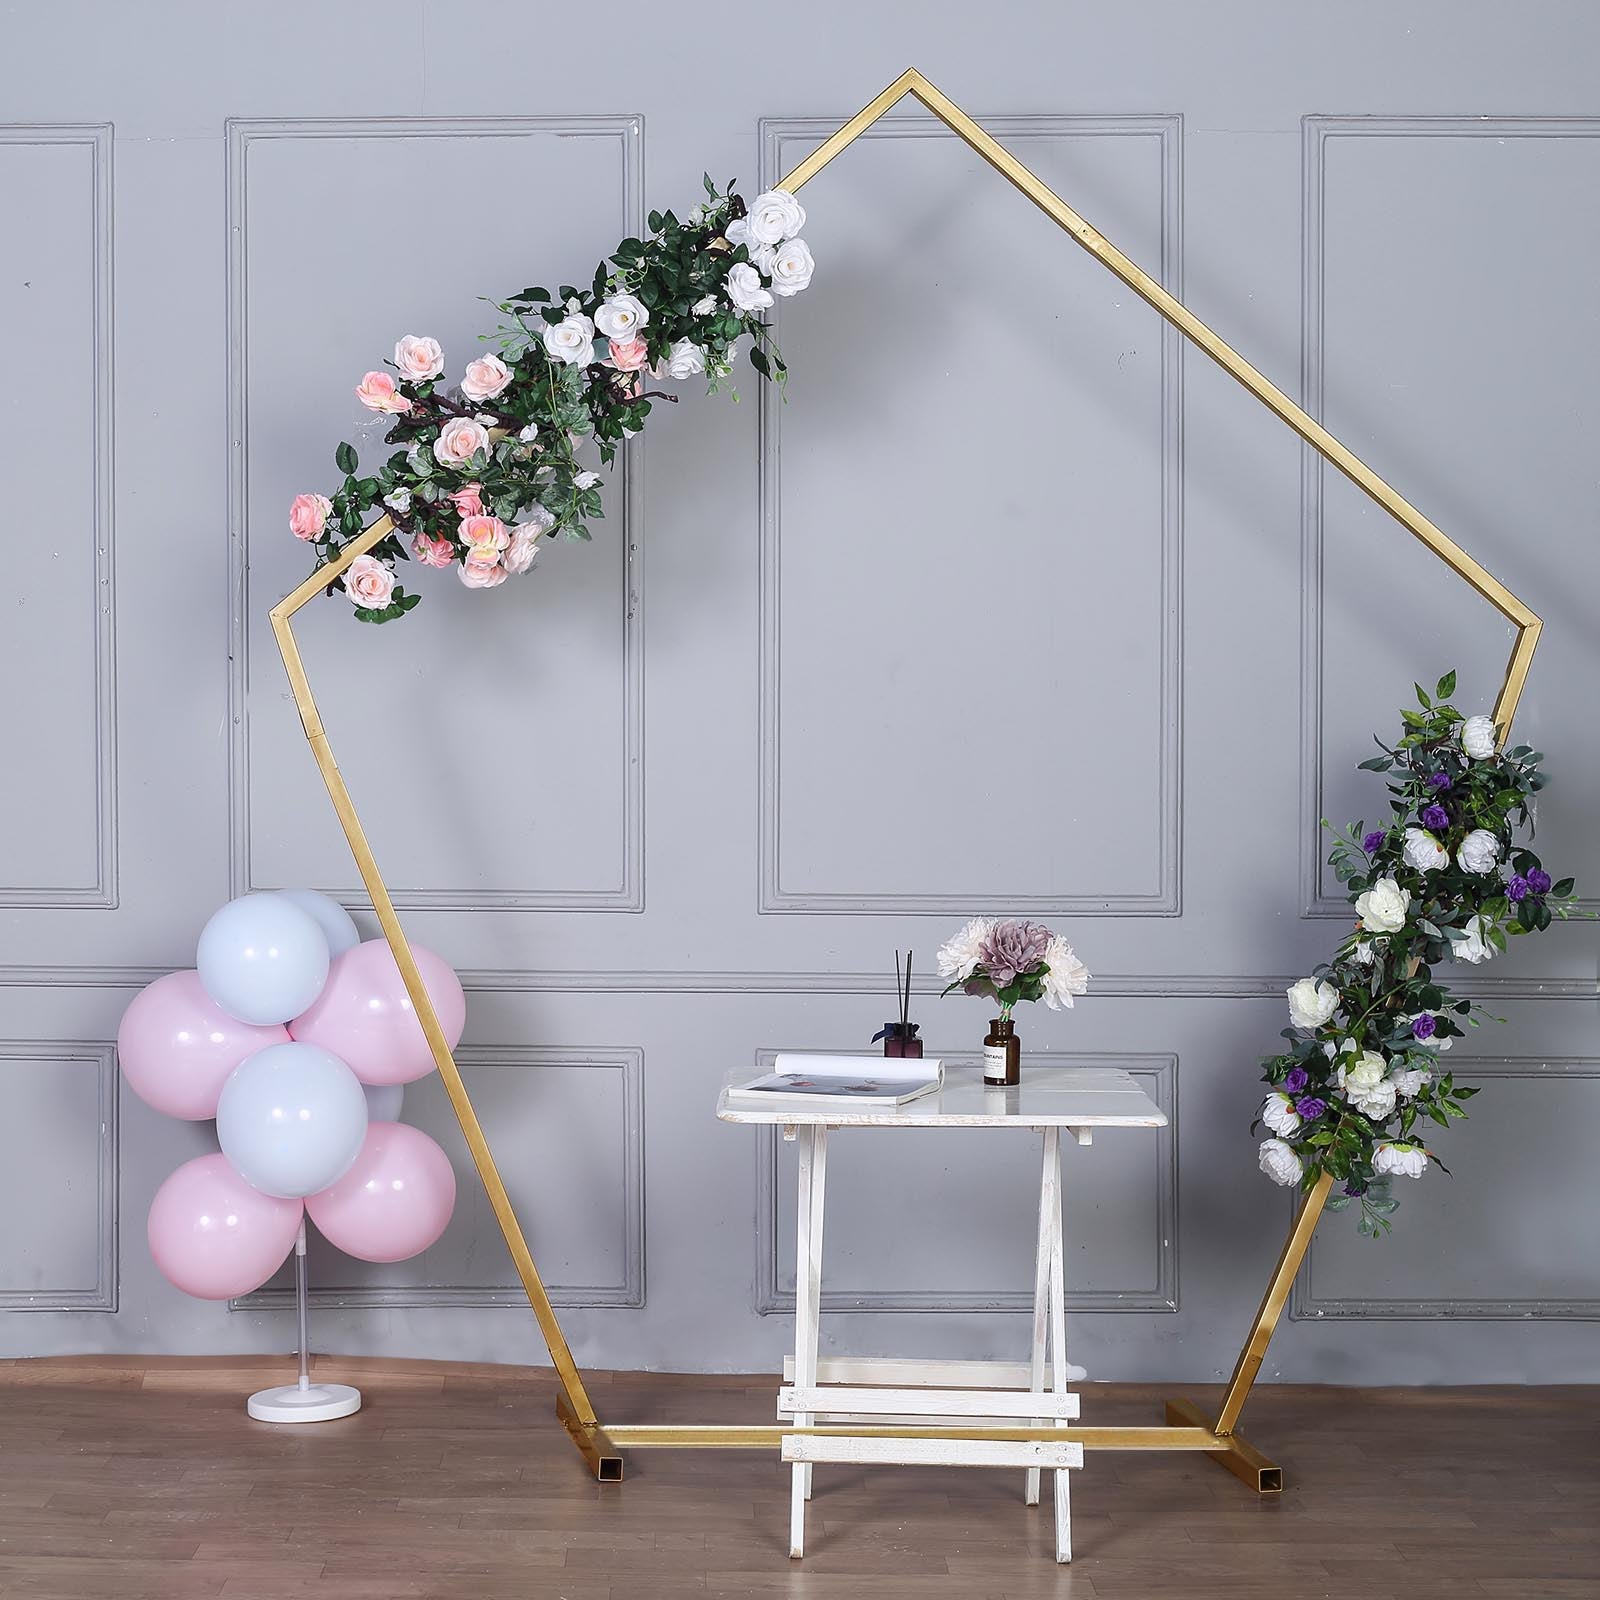 Parties Photo Booth Backdrop Stand For Weddings Efavormart 7ft Wooden Wedding Arch Backdrops Garden Decorations Outdoor Heptagonal Wedding Arbor Indoor Plant Support Structures Patio Lawn Garden Infinitodigital Com Br